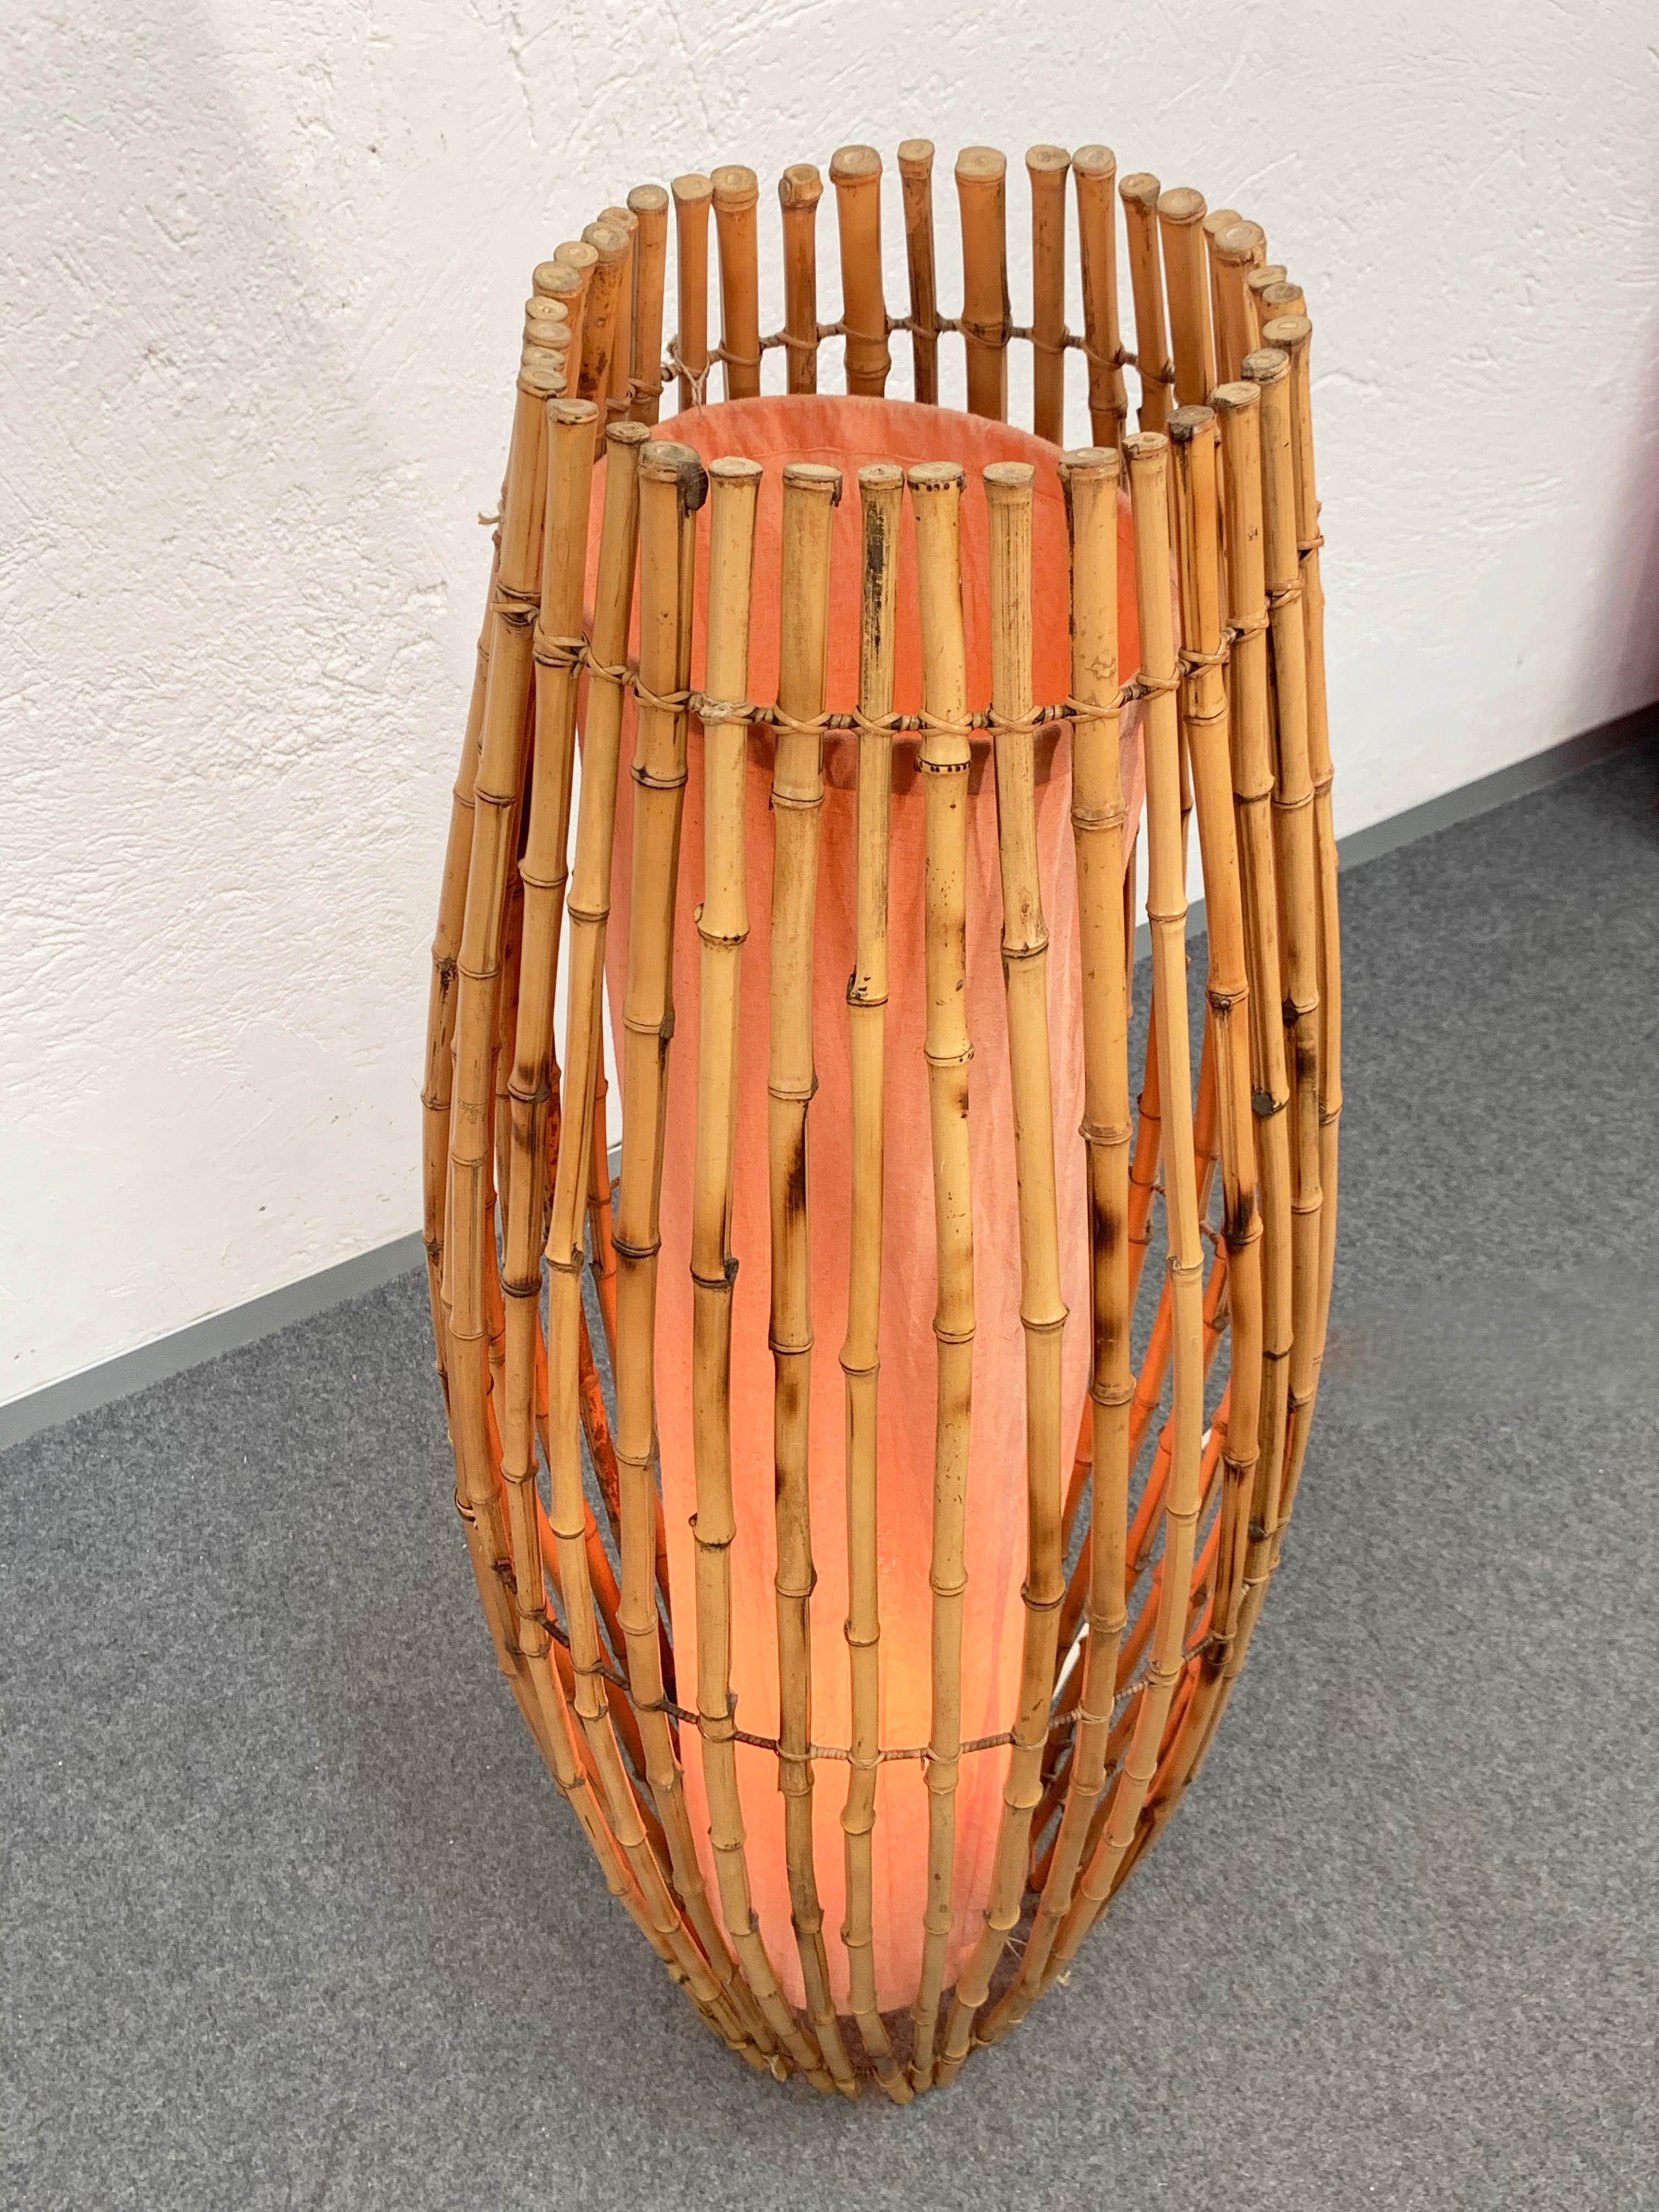 20th Century Midcentury Italian Bamboo and Rattan Floor Lamp Attributed to Albini, 1960s For Sale